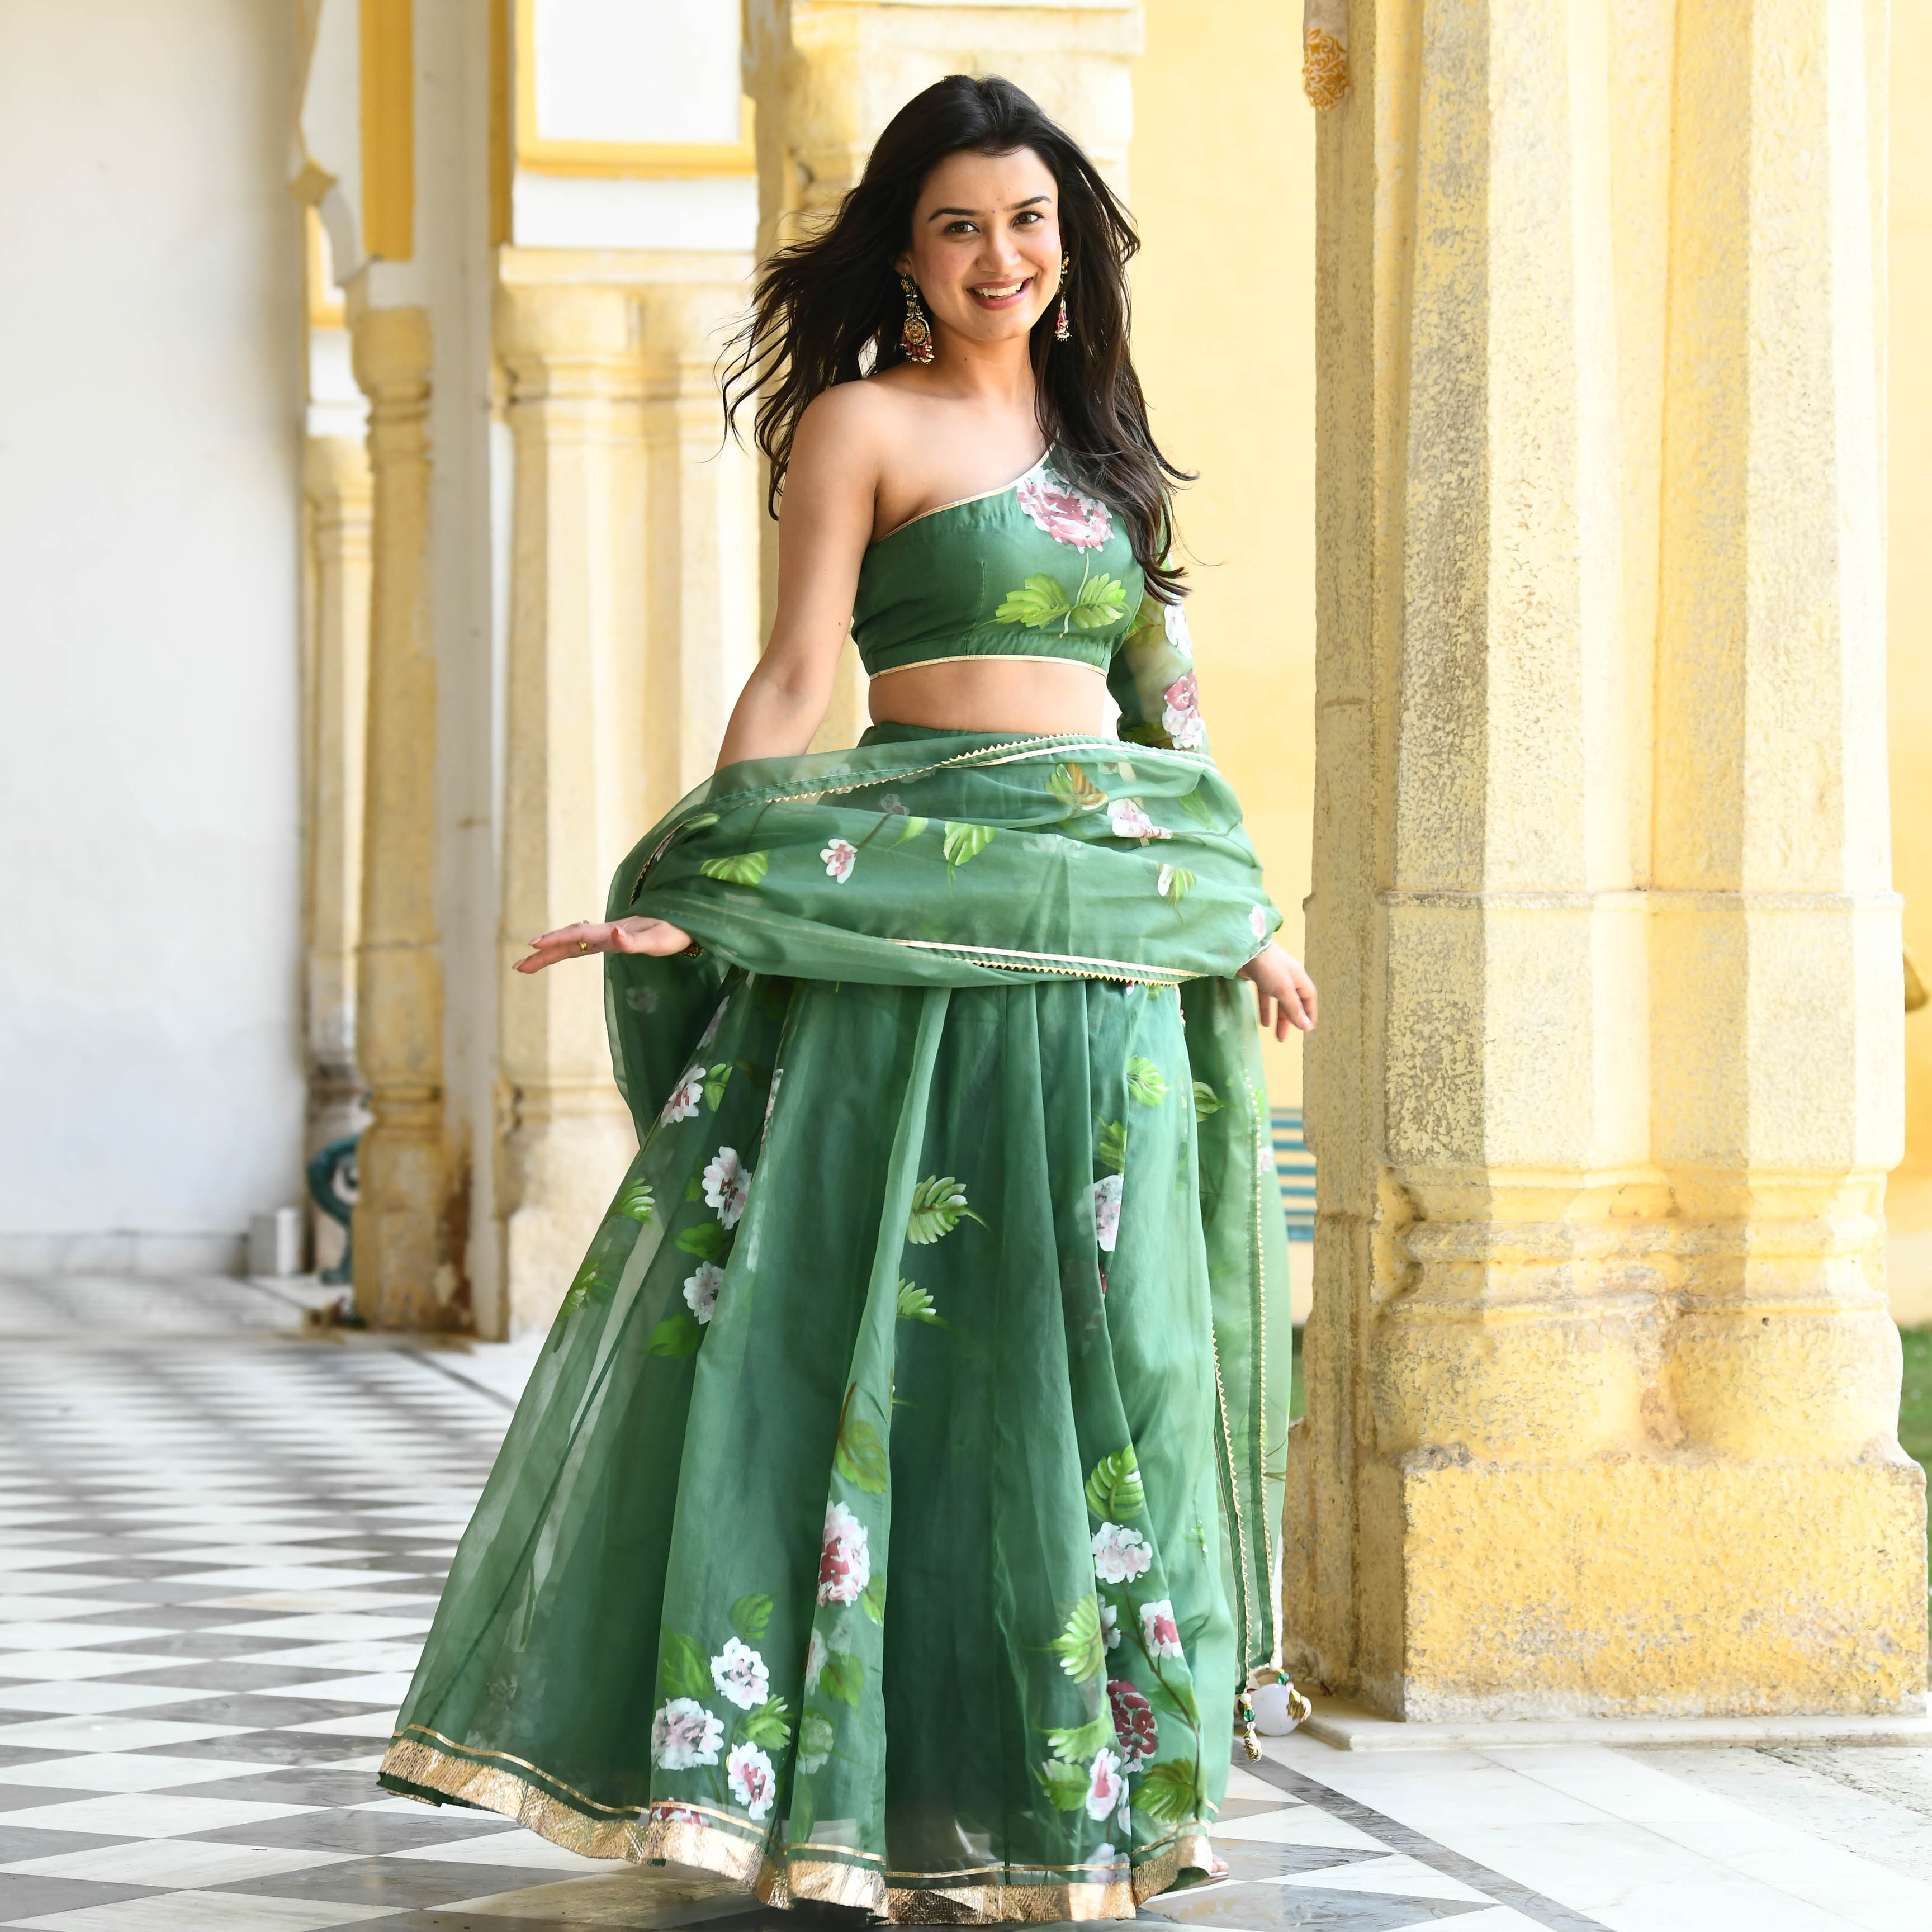 Buy PNTM FASHION Bridal Dirty Green Colour Lehenga Choli | Dulhan Lehenga  Choli | Wedding Lehenga Choli at Amazon.in